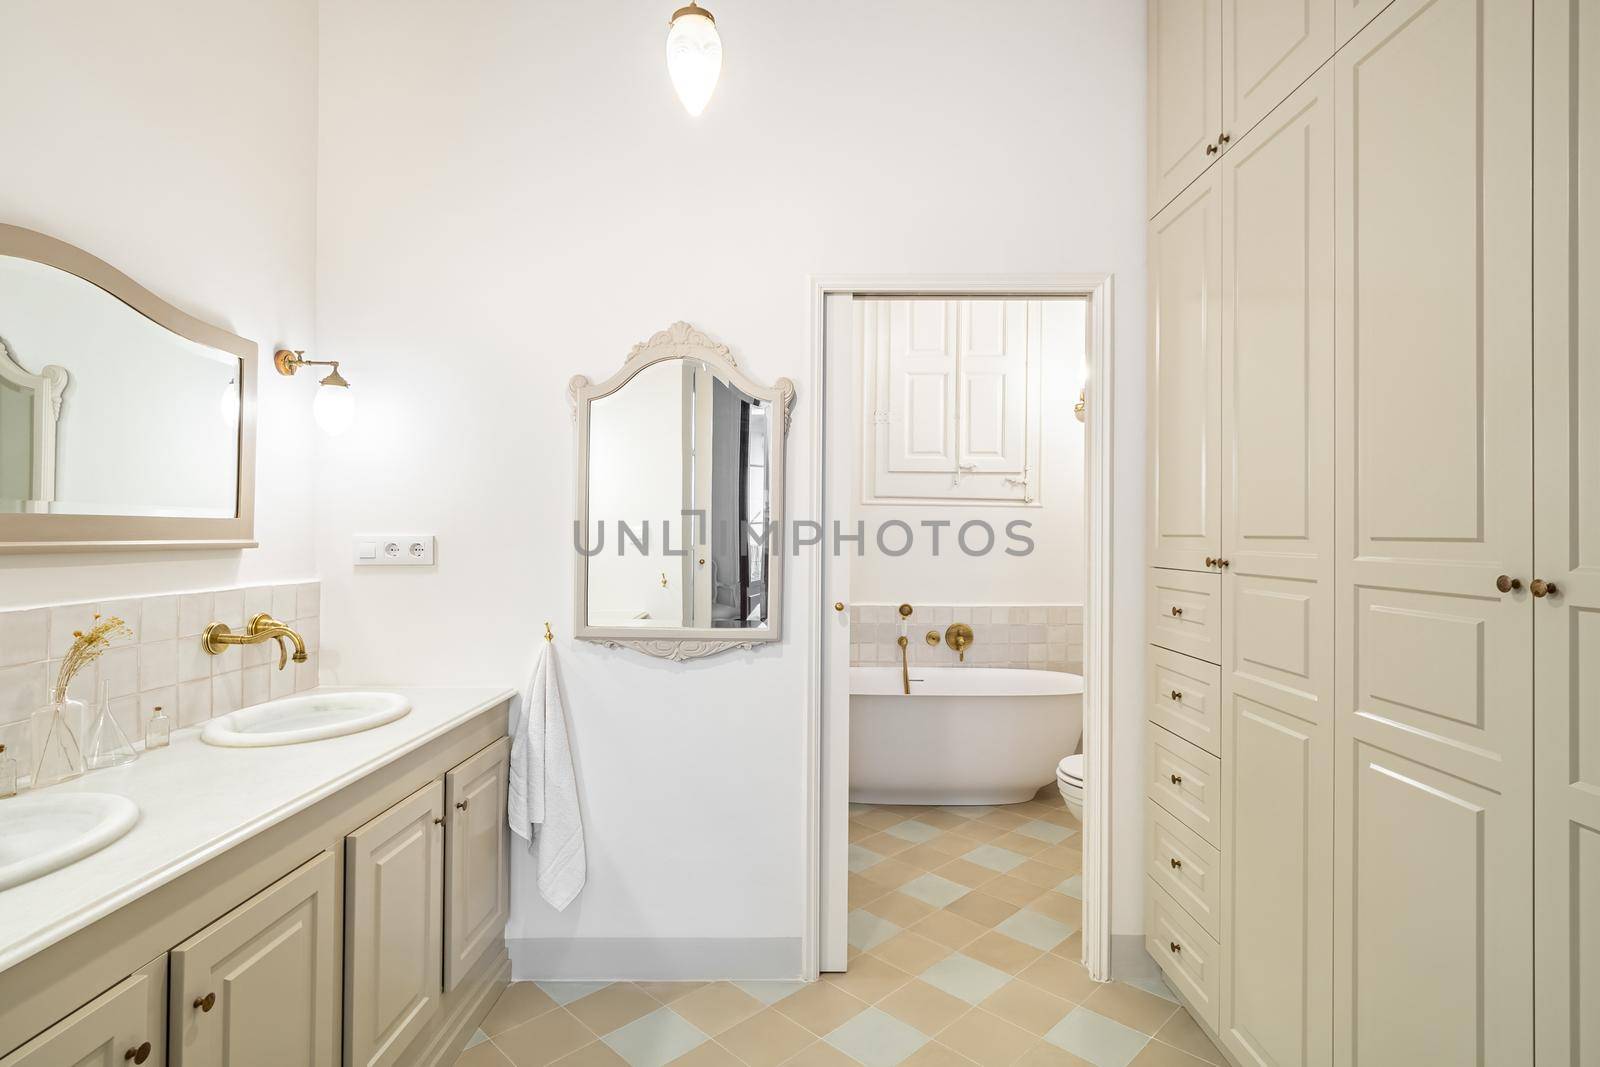 Interior of retro or classic style bathroom decorated in beige color with bath zone, big wardrobe, two sinks and vintage mirrors